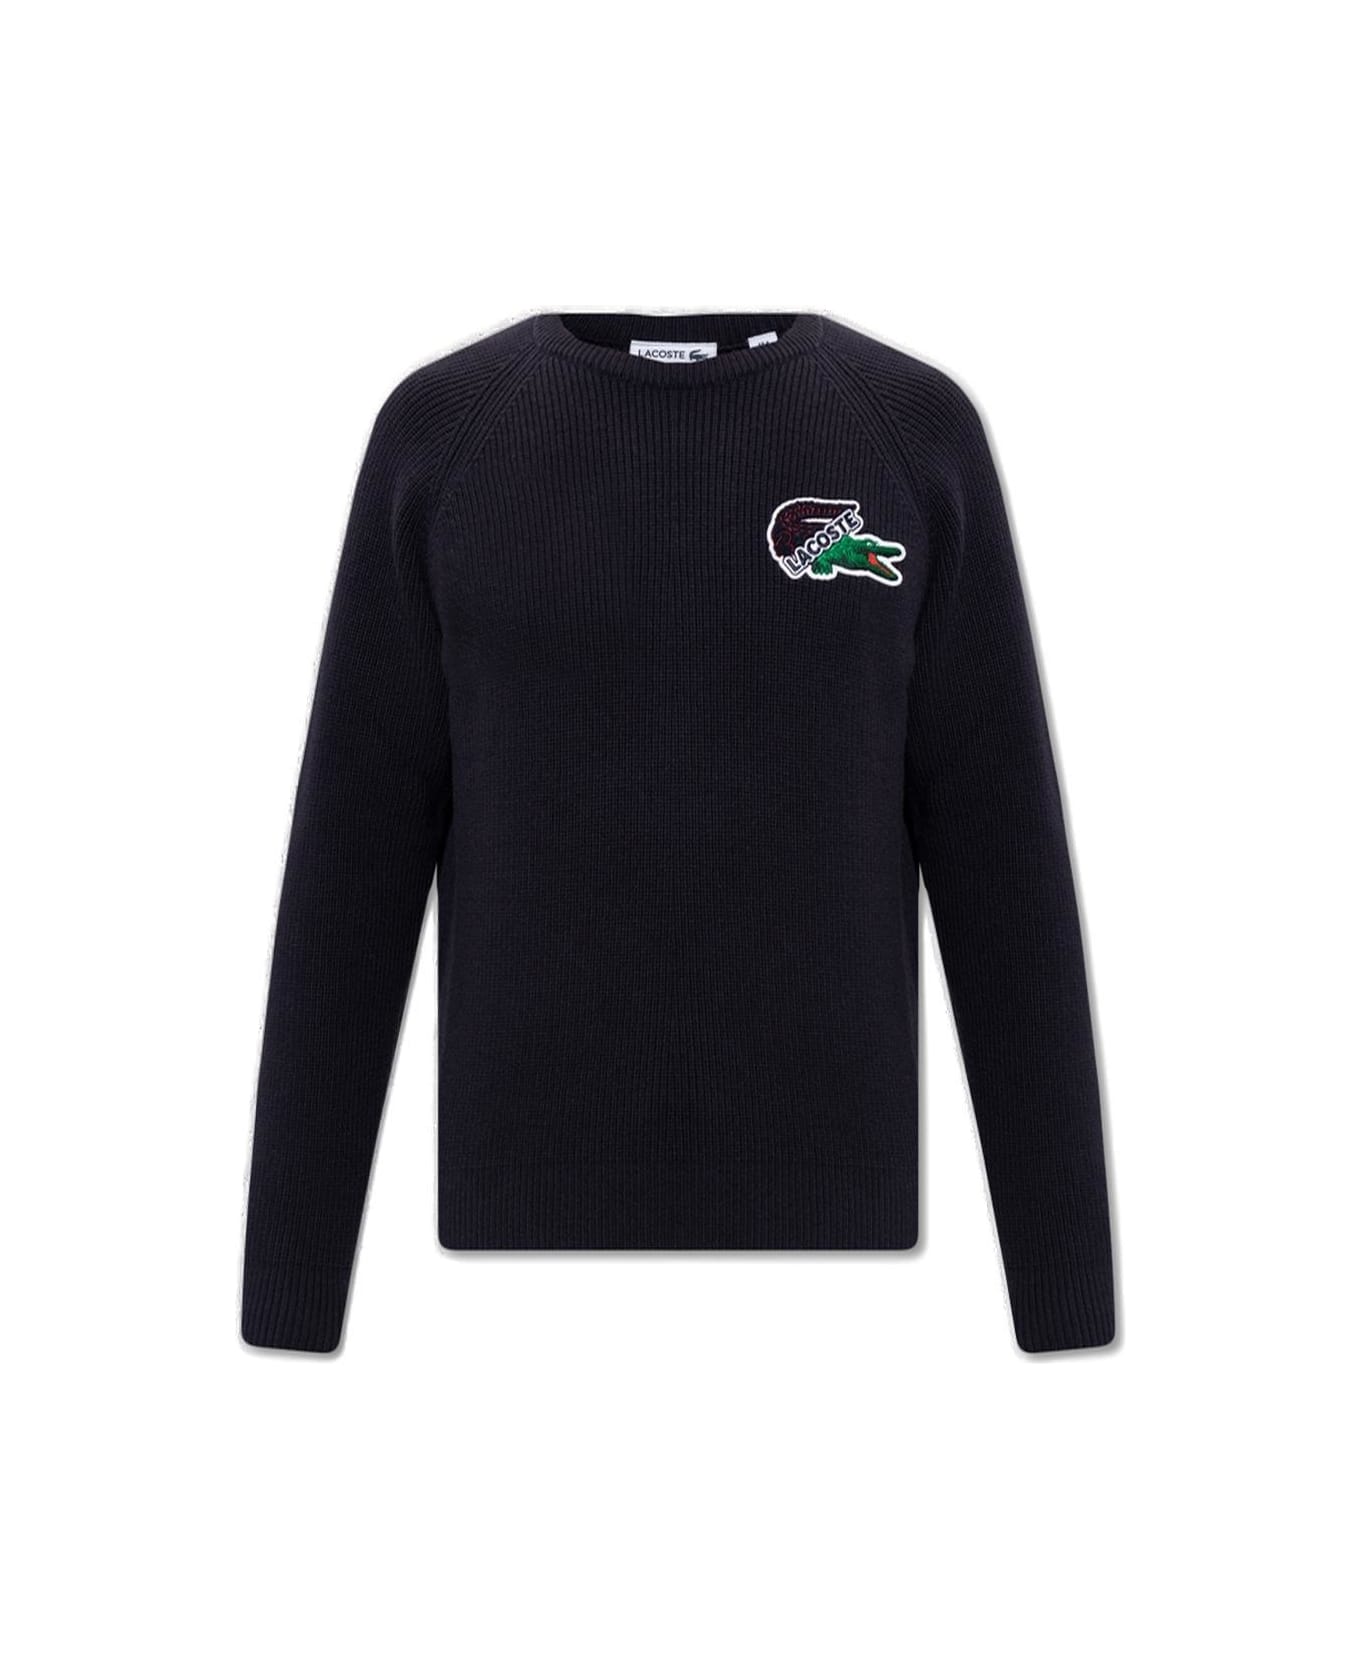 Lacoste Logo Patch Knitted Crewneck Jumper - Blue